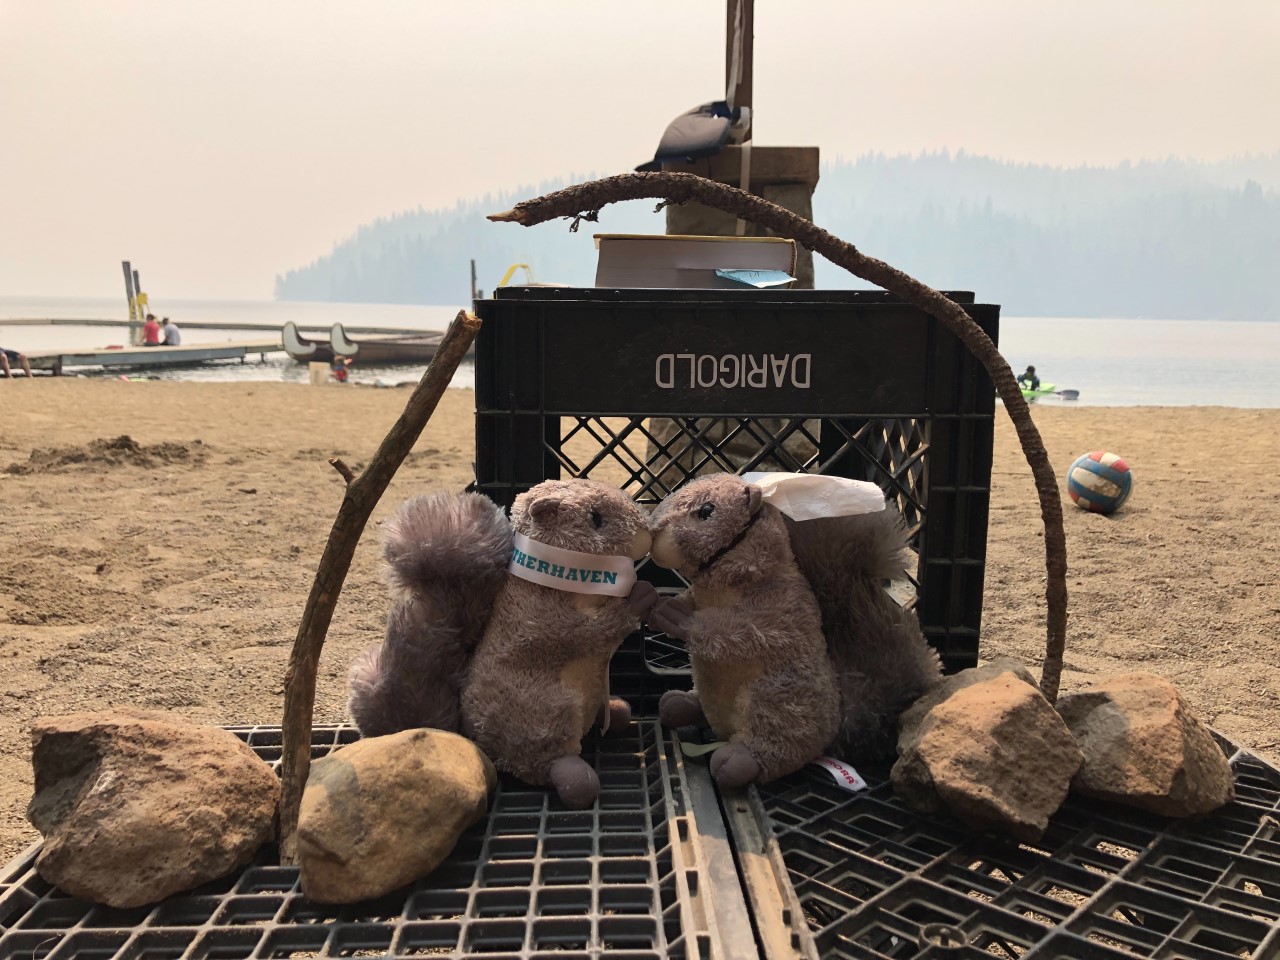 two stuffed animal squirrels kissing on a milk crate on the beach